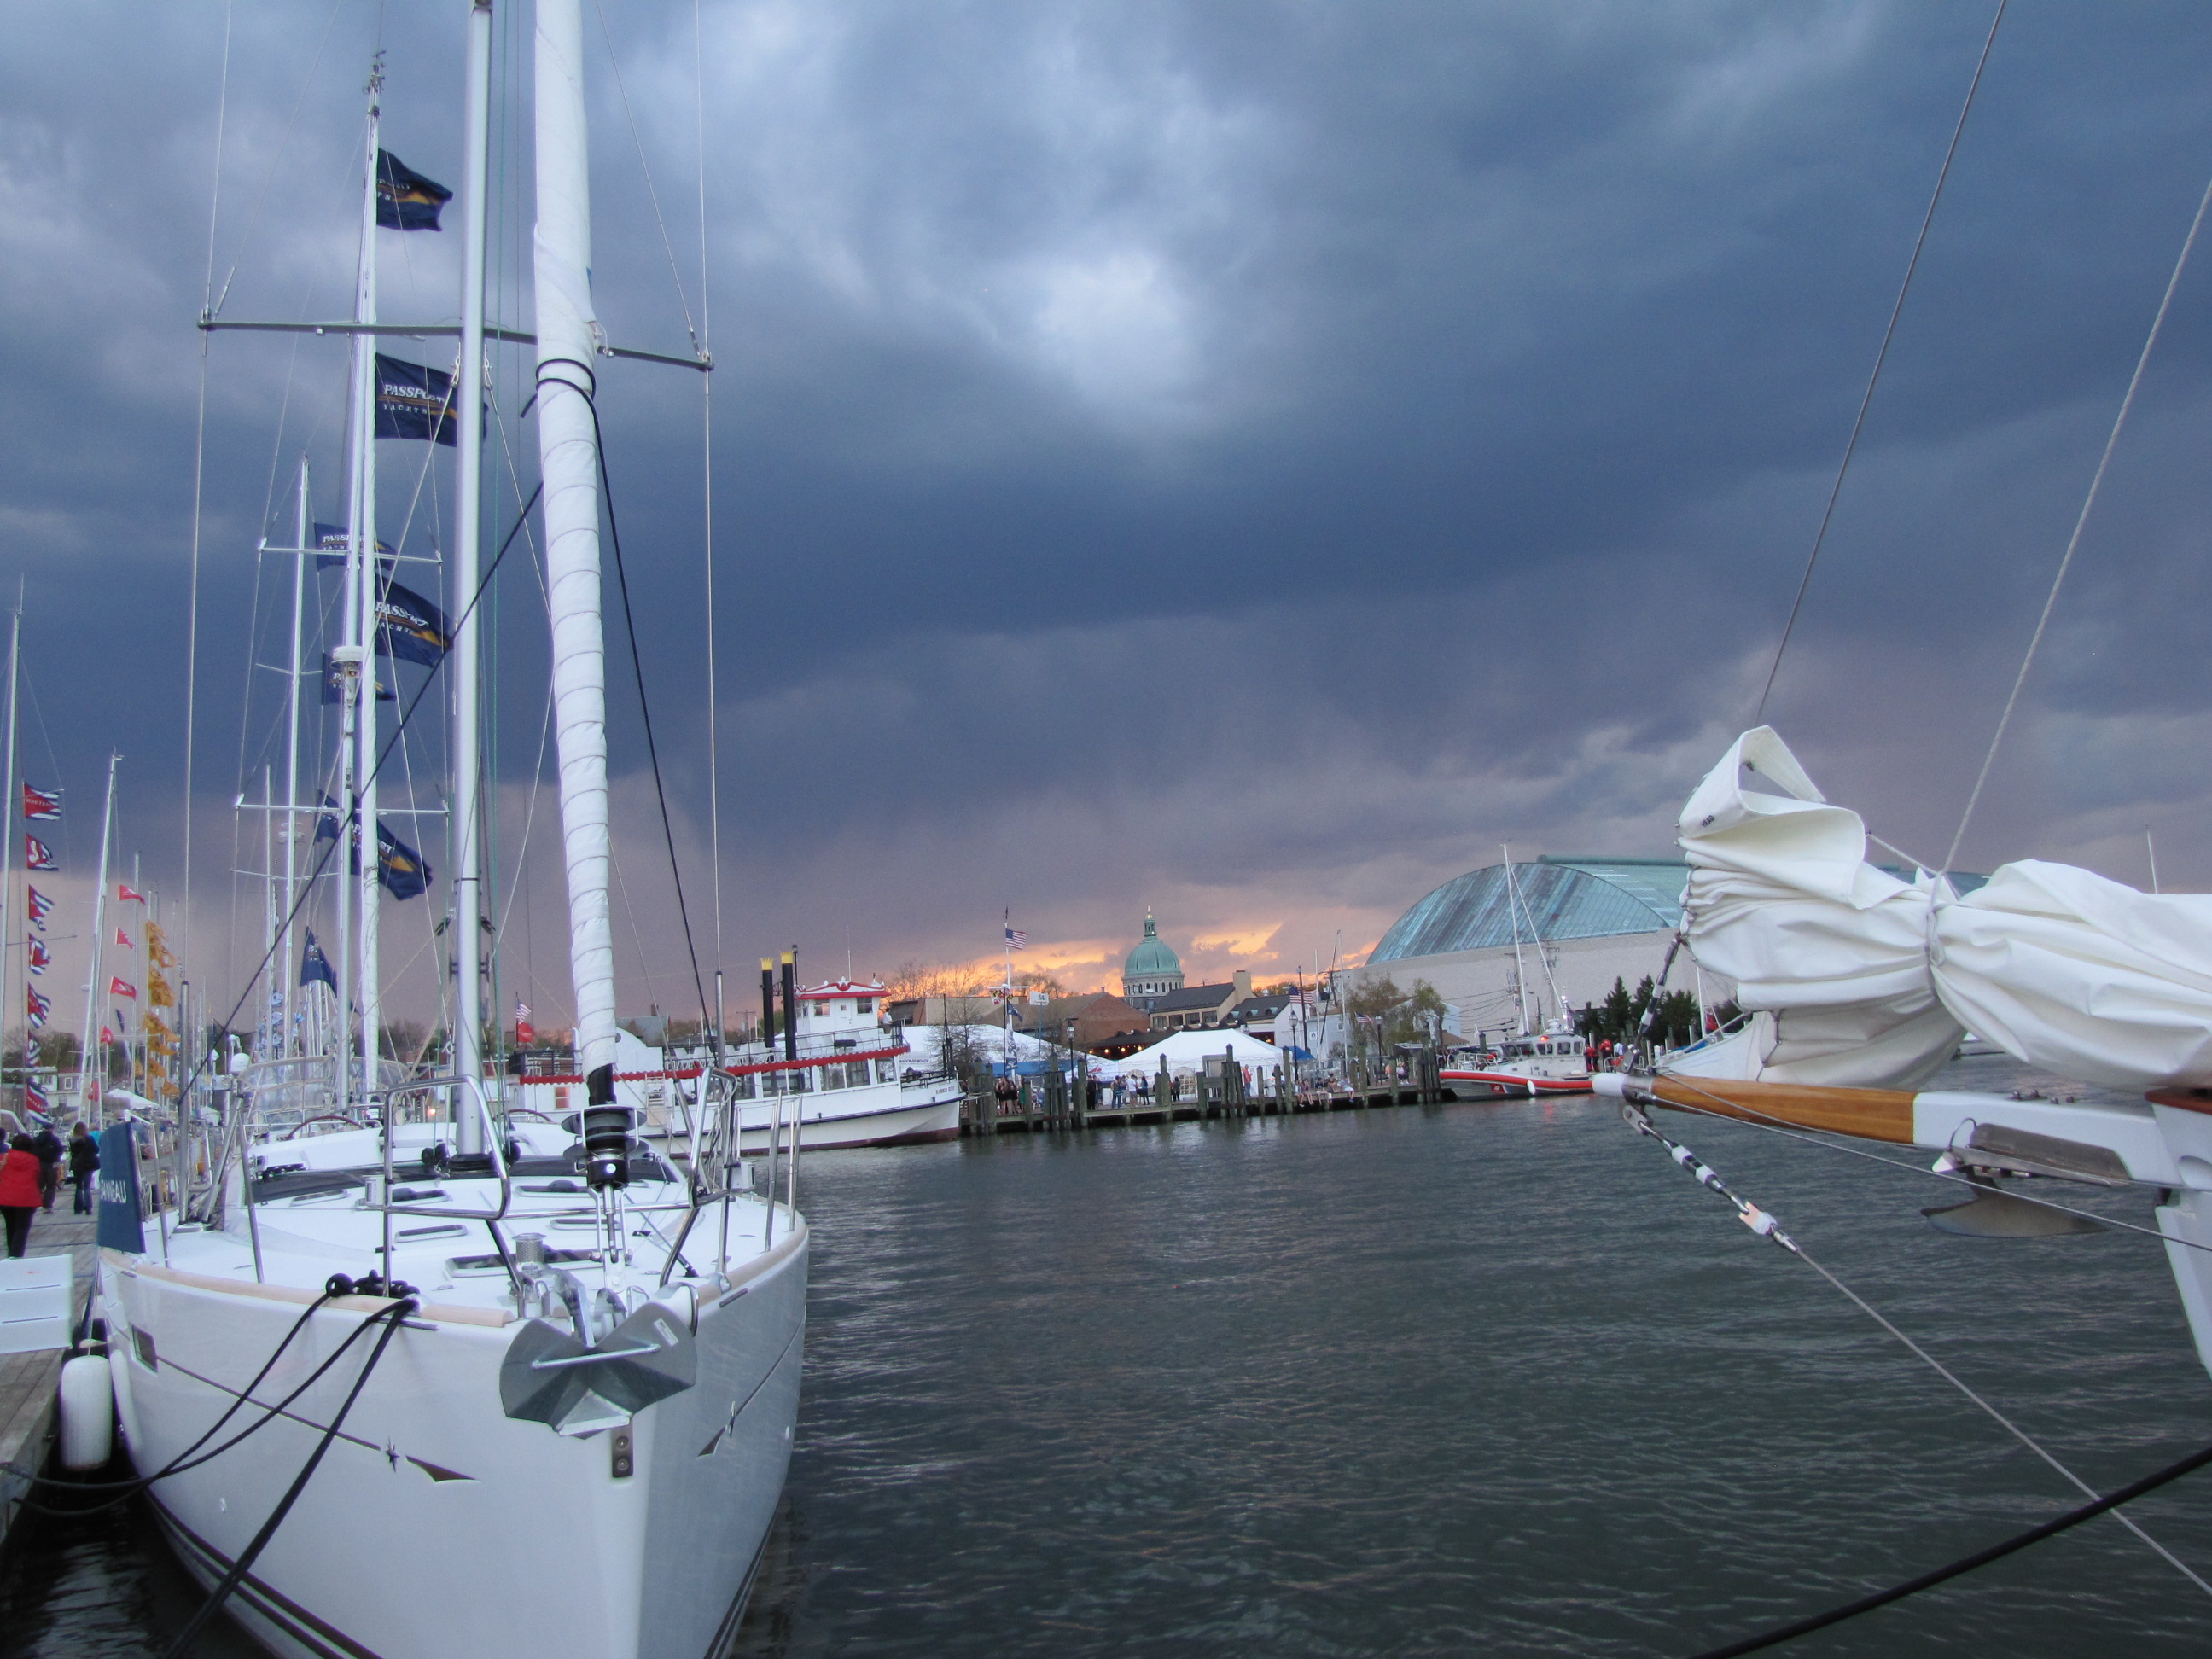 Storm clouds passing over the Annapolis Harbor